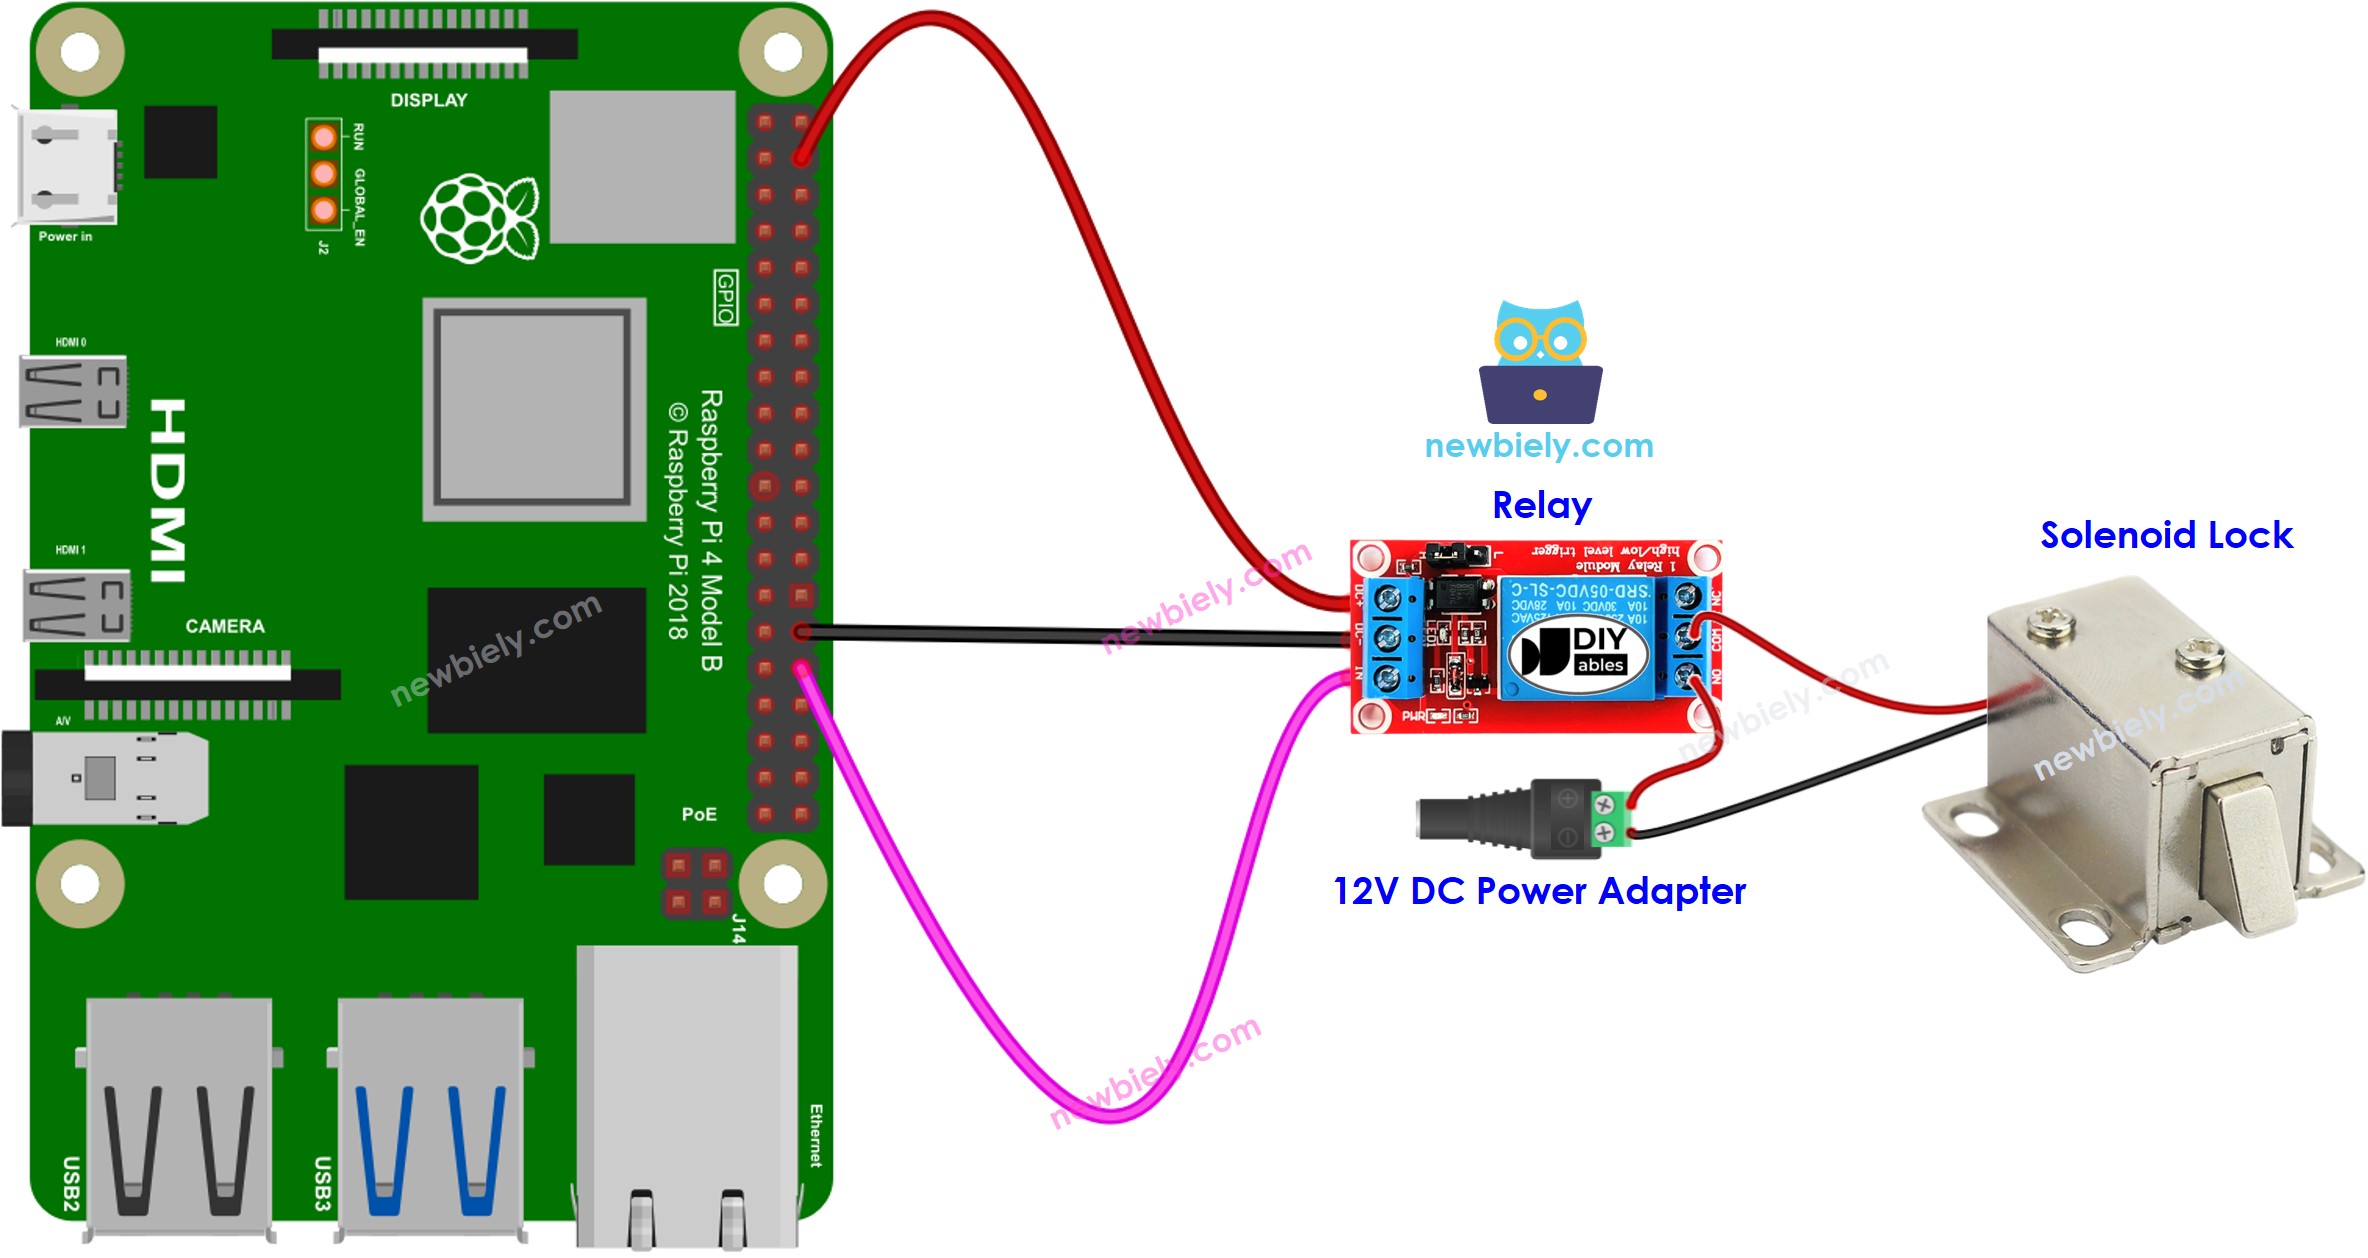 The wiring diagram between Raspberry Pi and Solenoid Lock